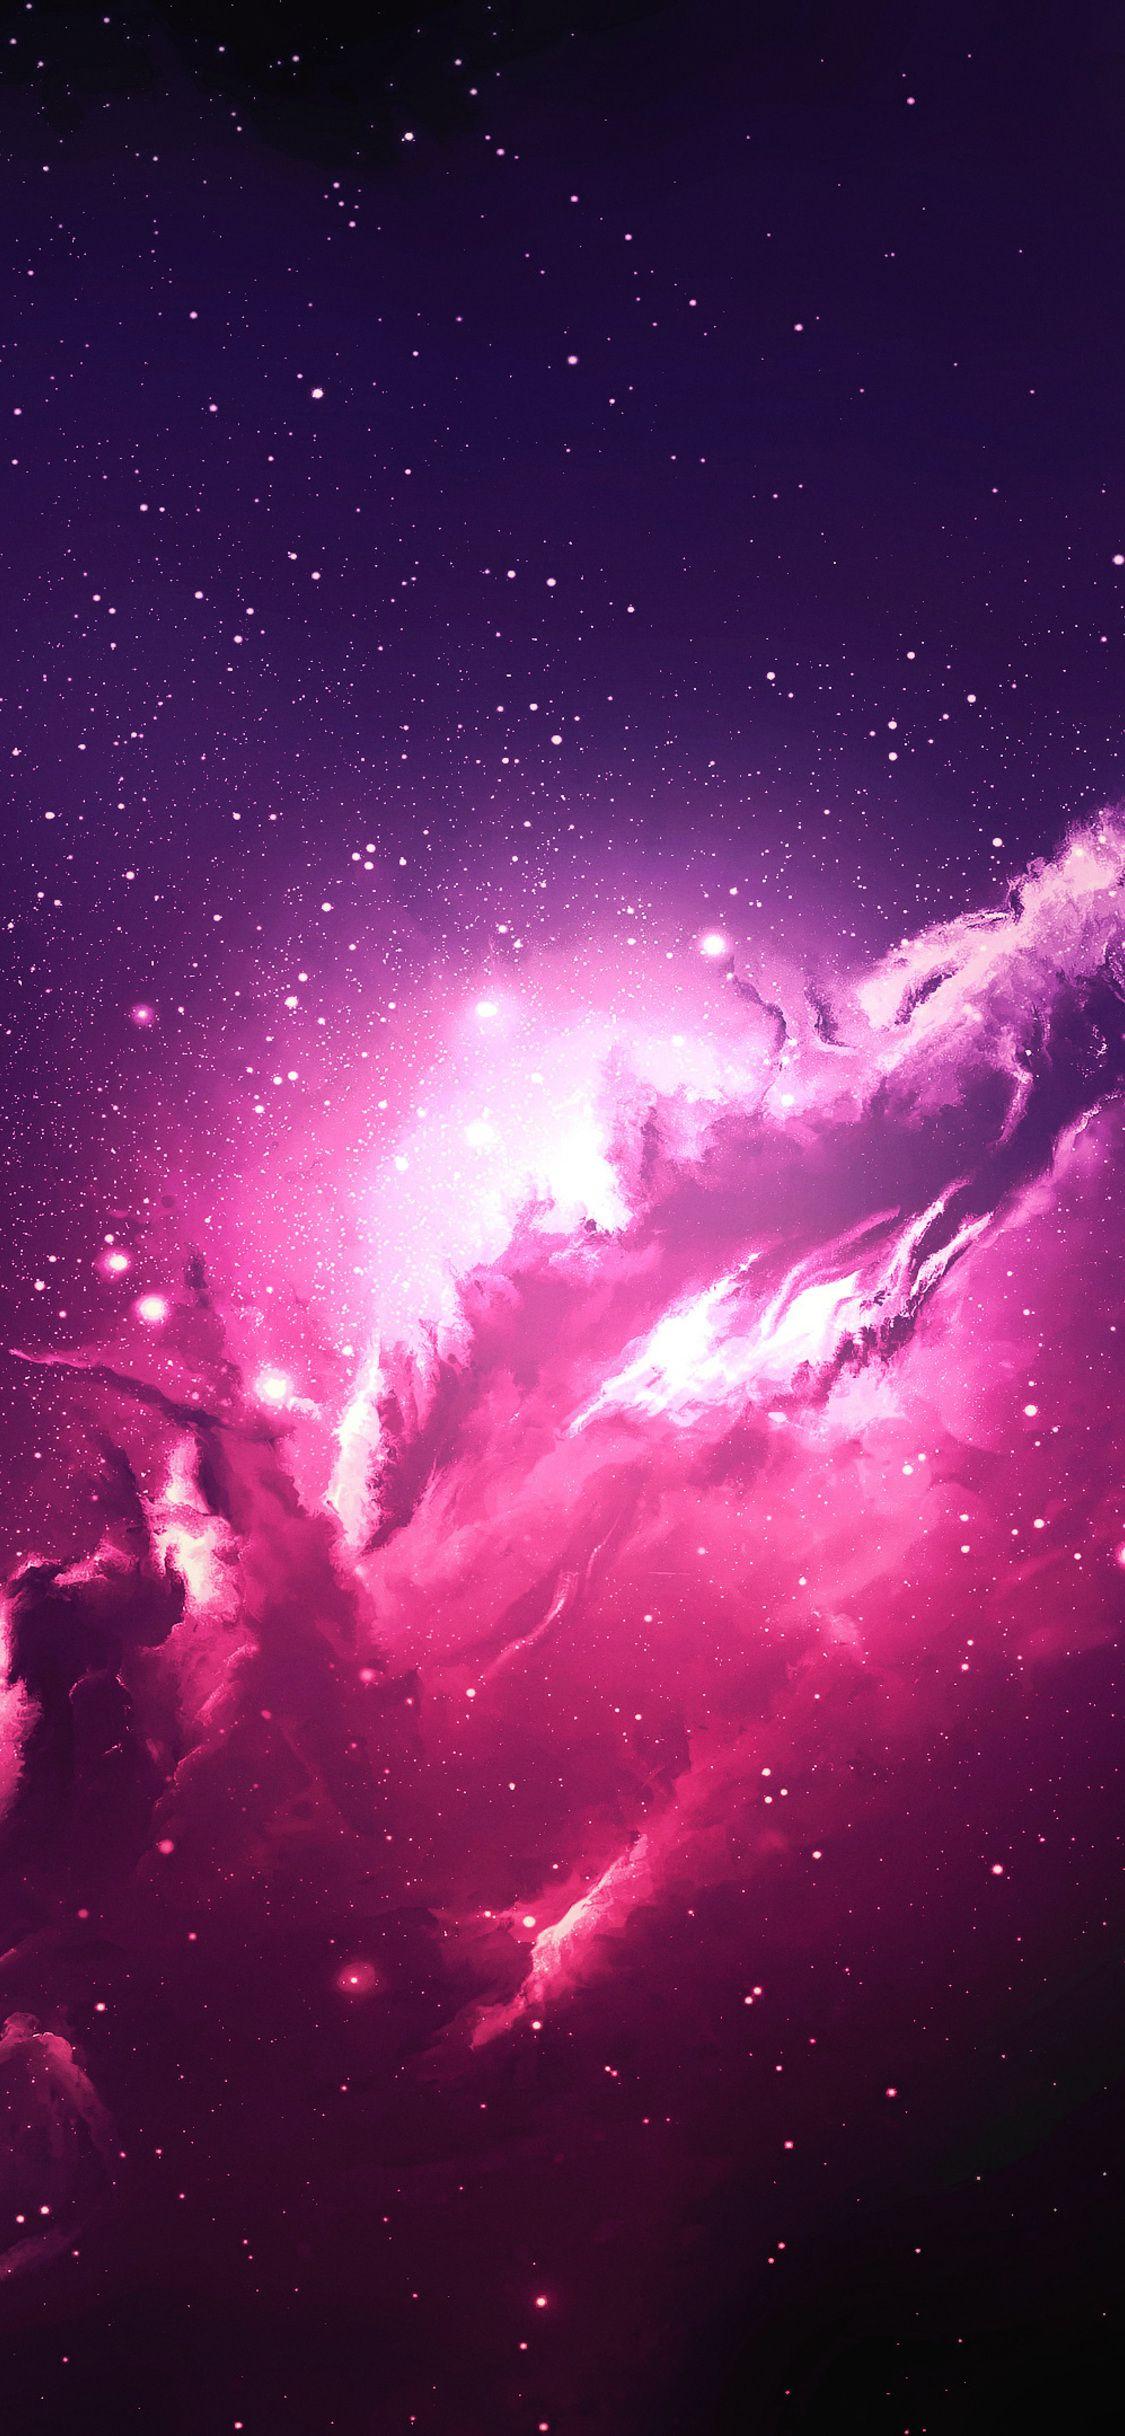 17+ Ultra Hd Iphone Xr Space Wallpaper Images